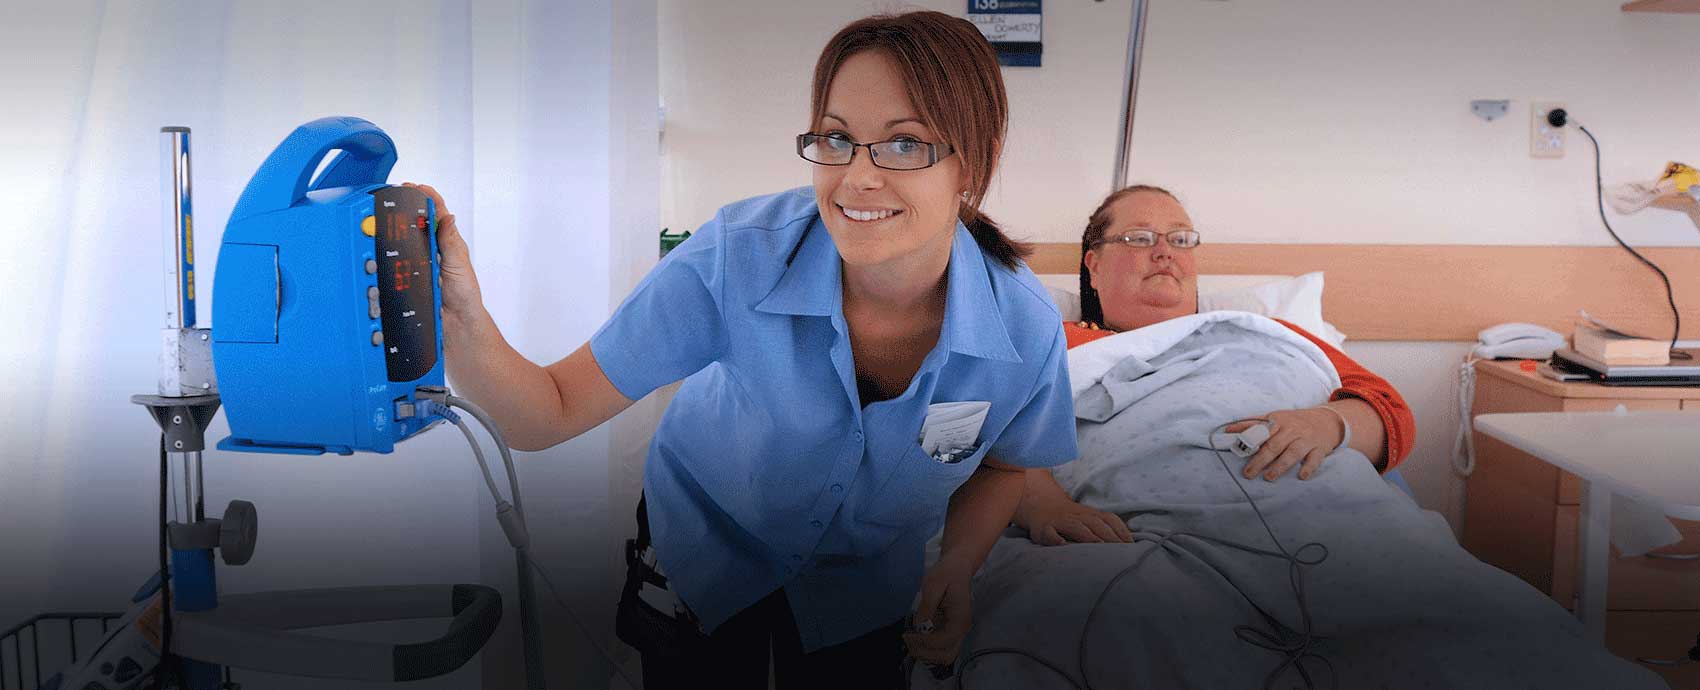 Nurse with a patient in a hospital in regional Victoria